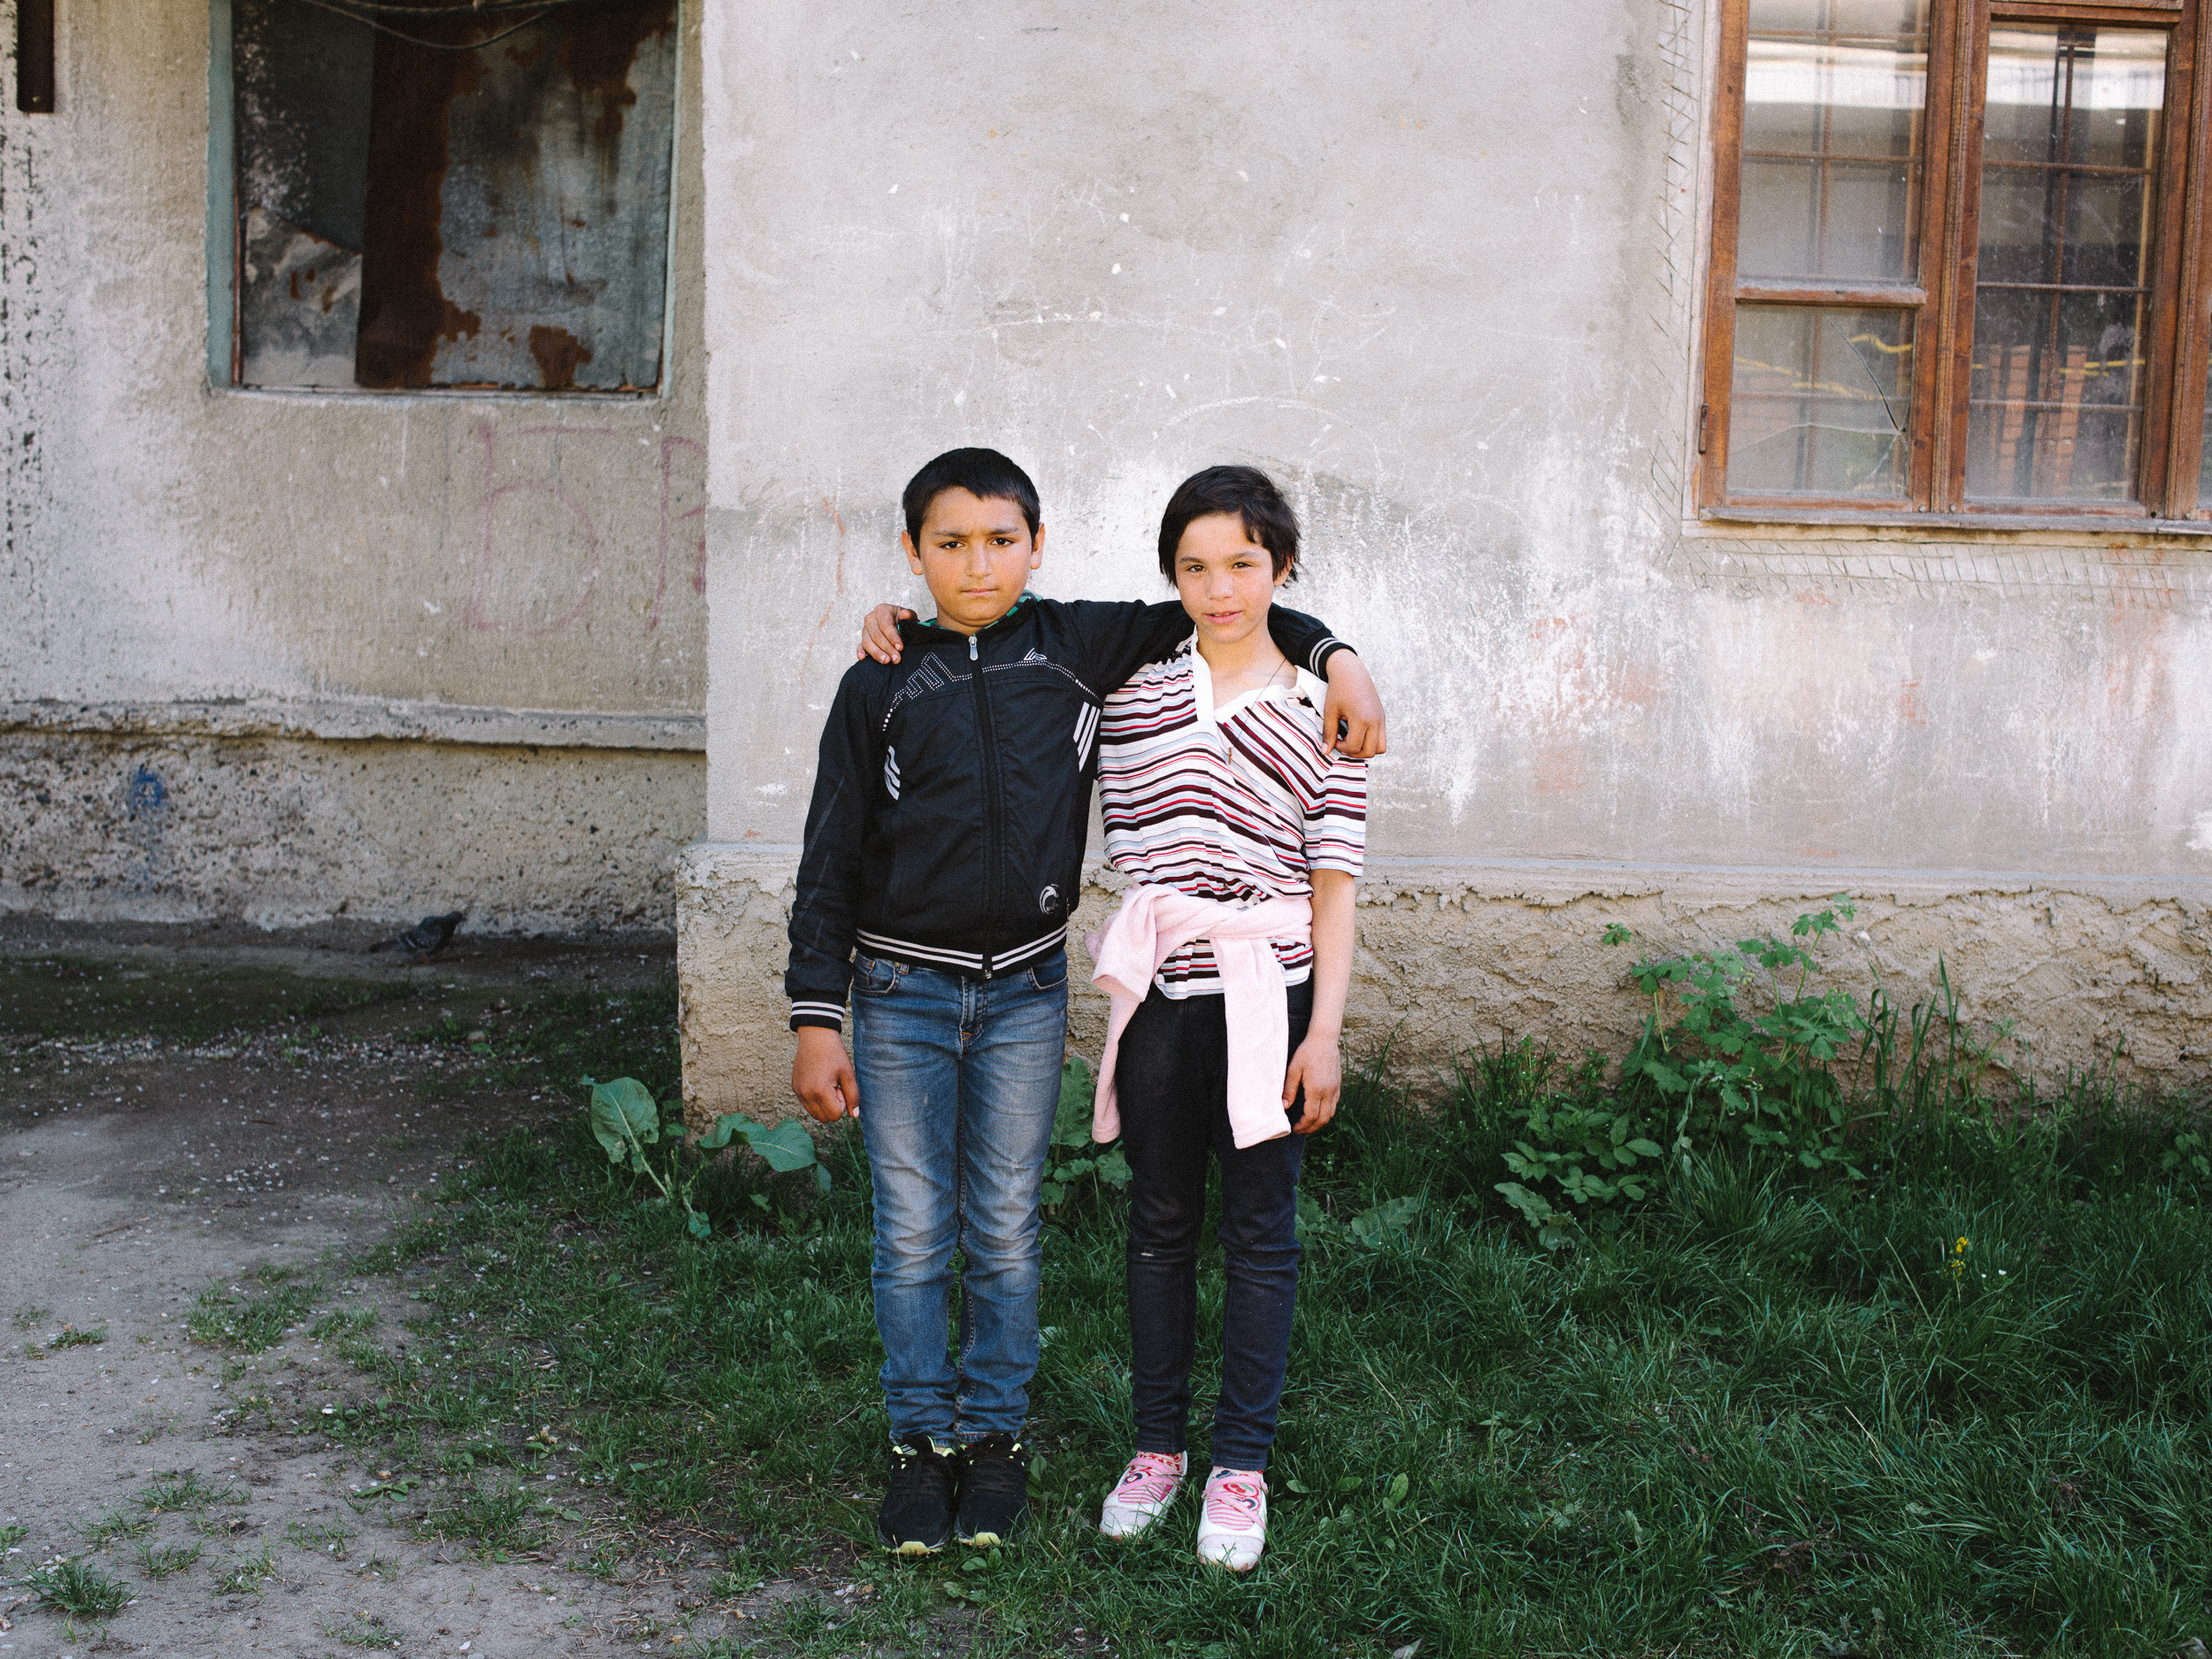 Matvej, 11, with his cousin, in front of their home, 'the Titanic'